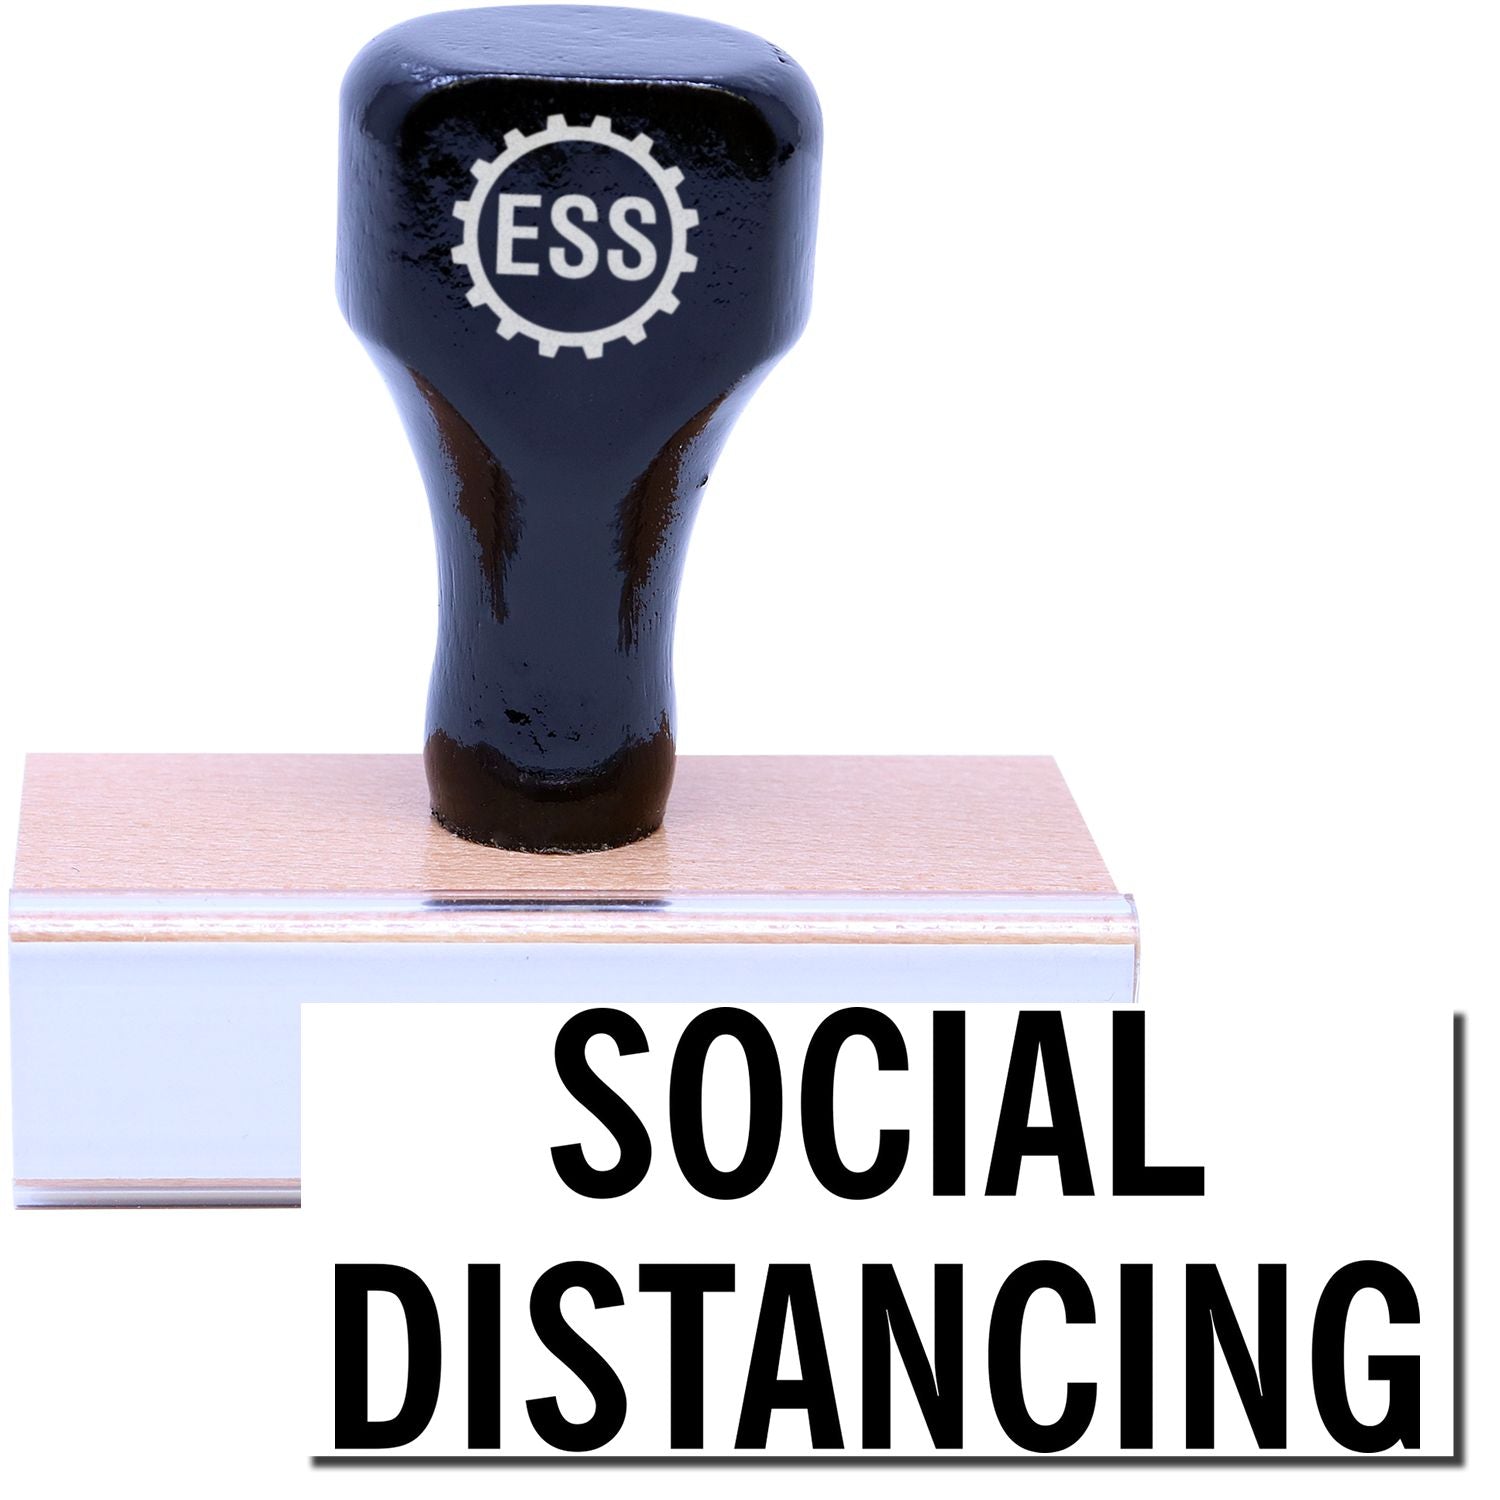 A stock office rubber stamp with a stamped image showing how the text "SOCIAL DISTANCING" in a large font is displayed after stamping.